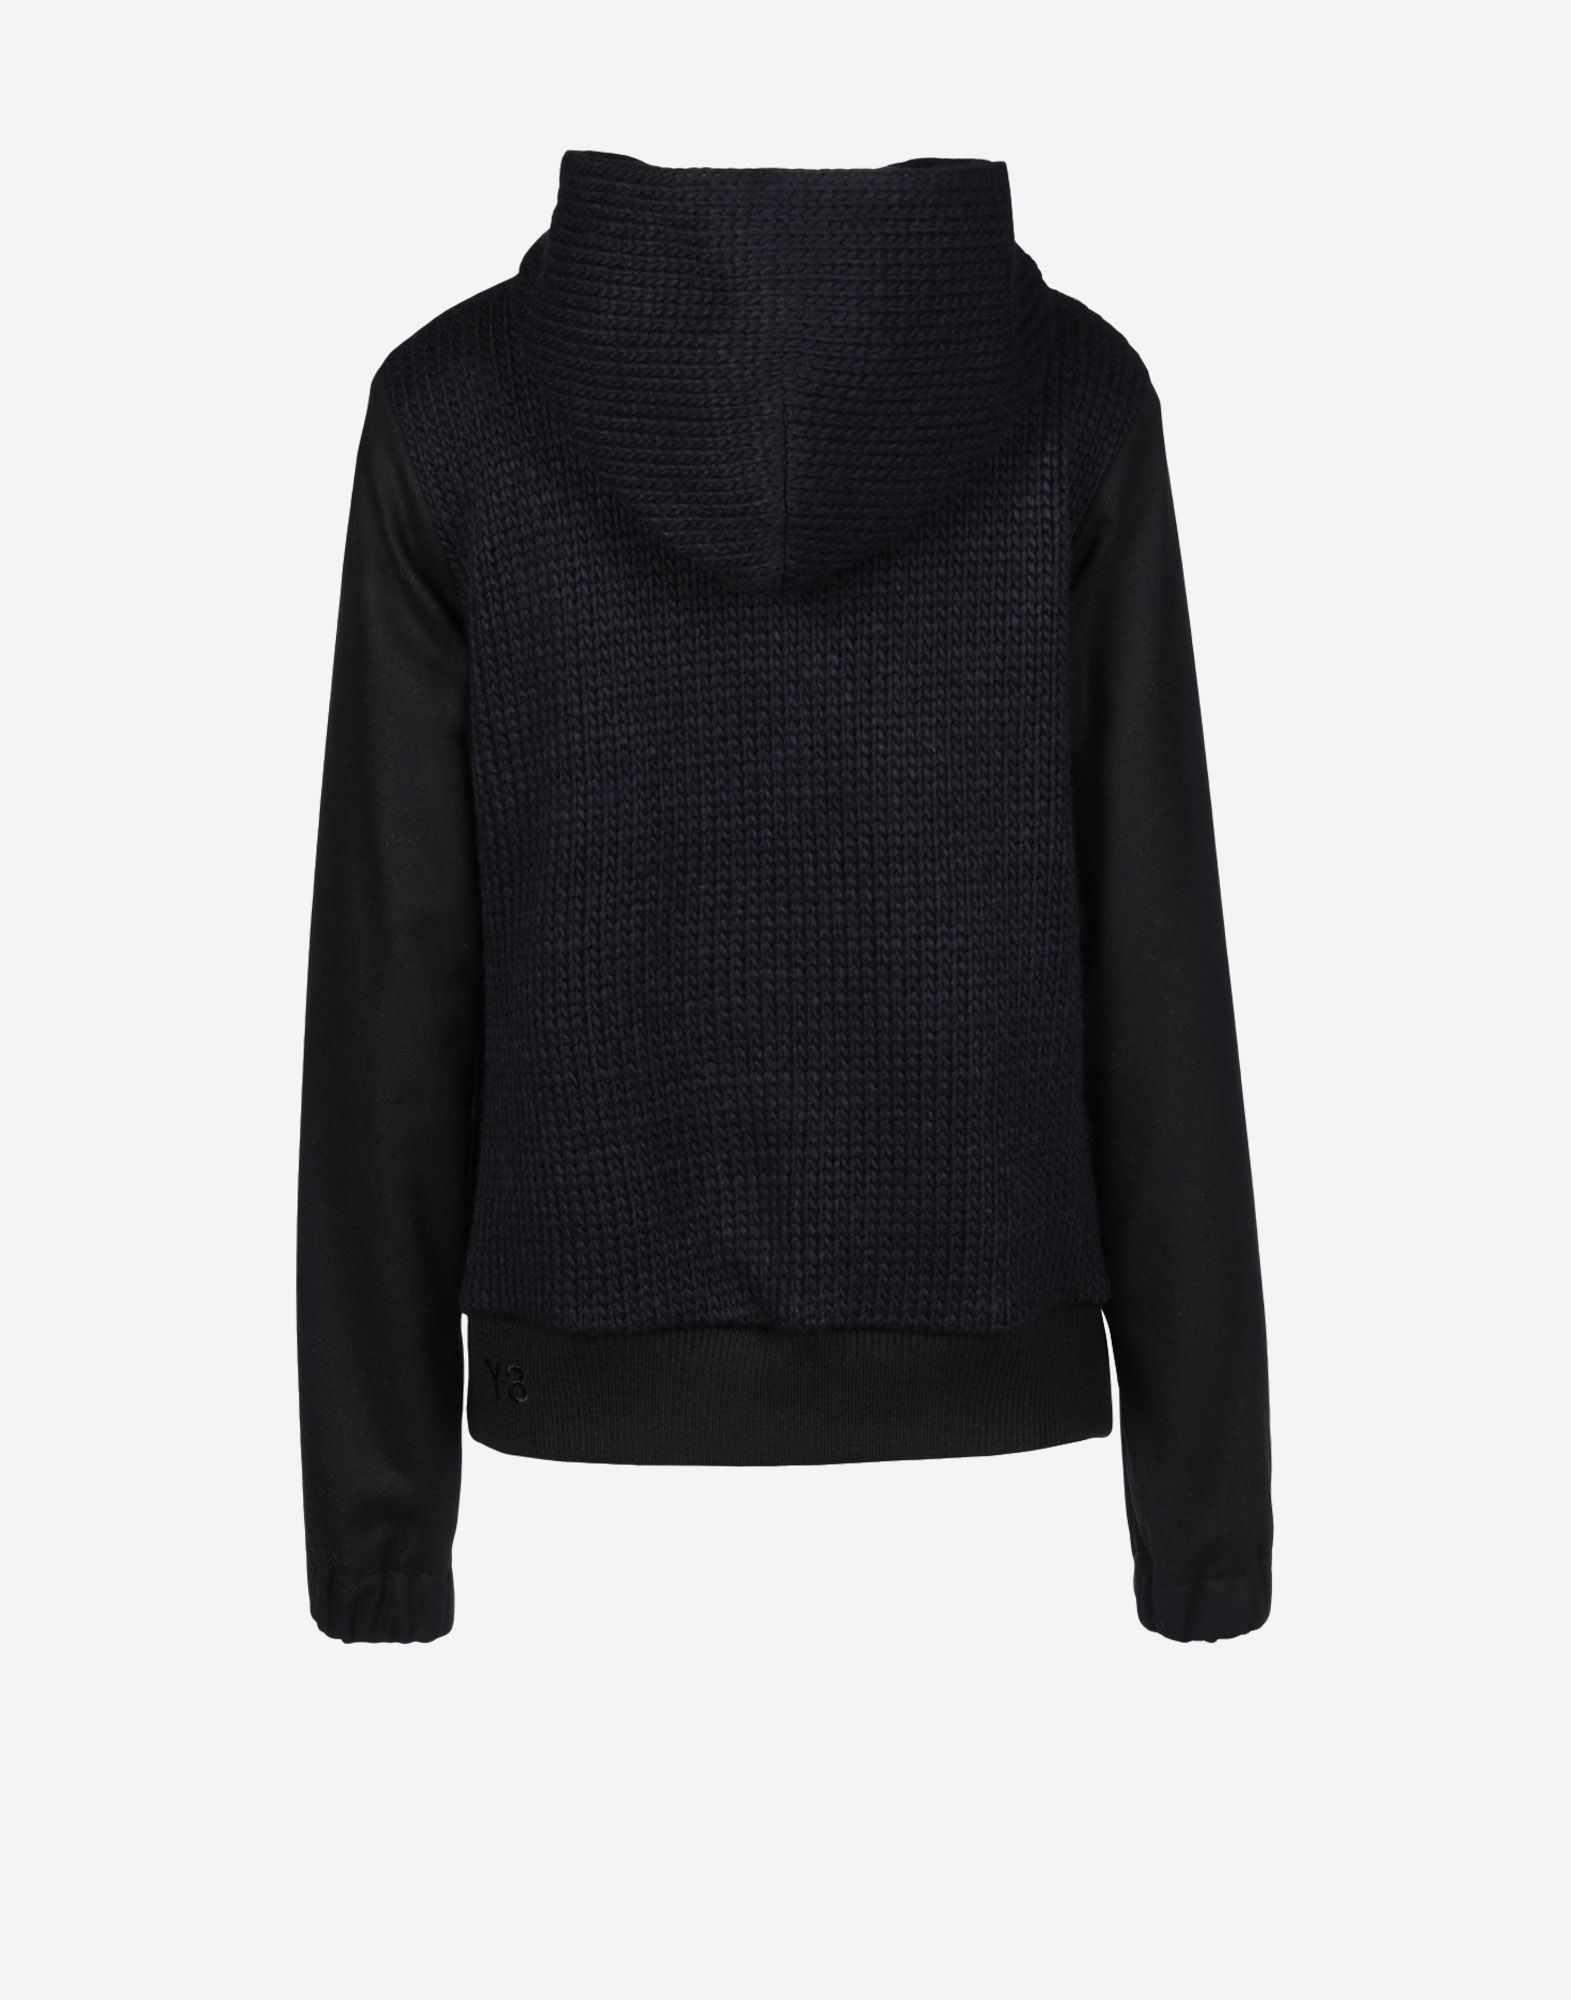 Y 3 Wool Knit Hoodie for Women | Adidas Y-3 Official Store